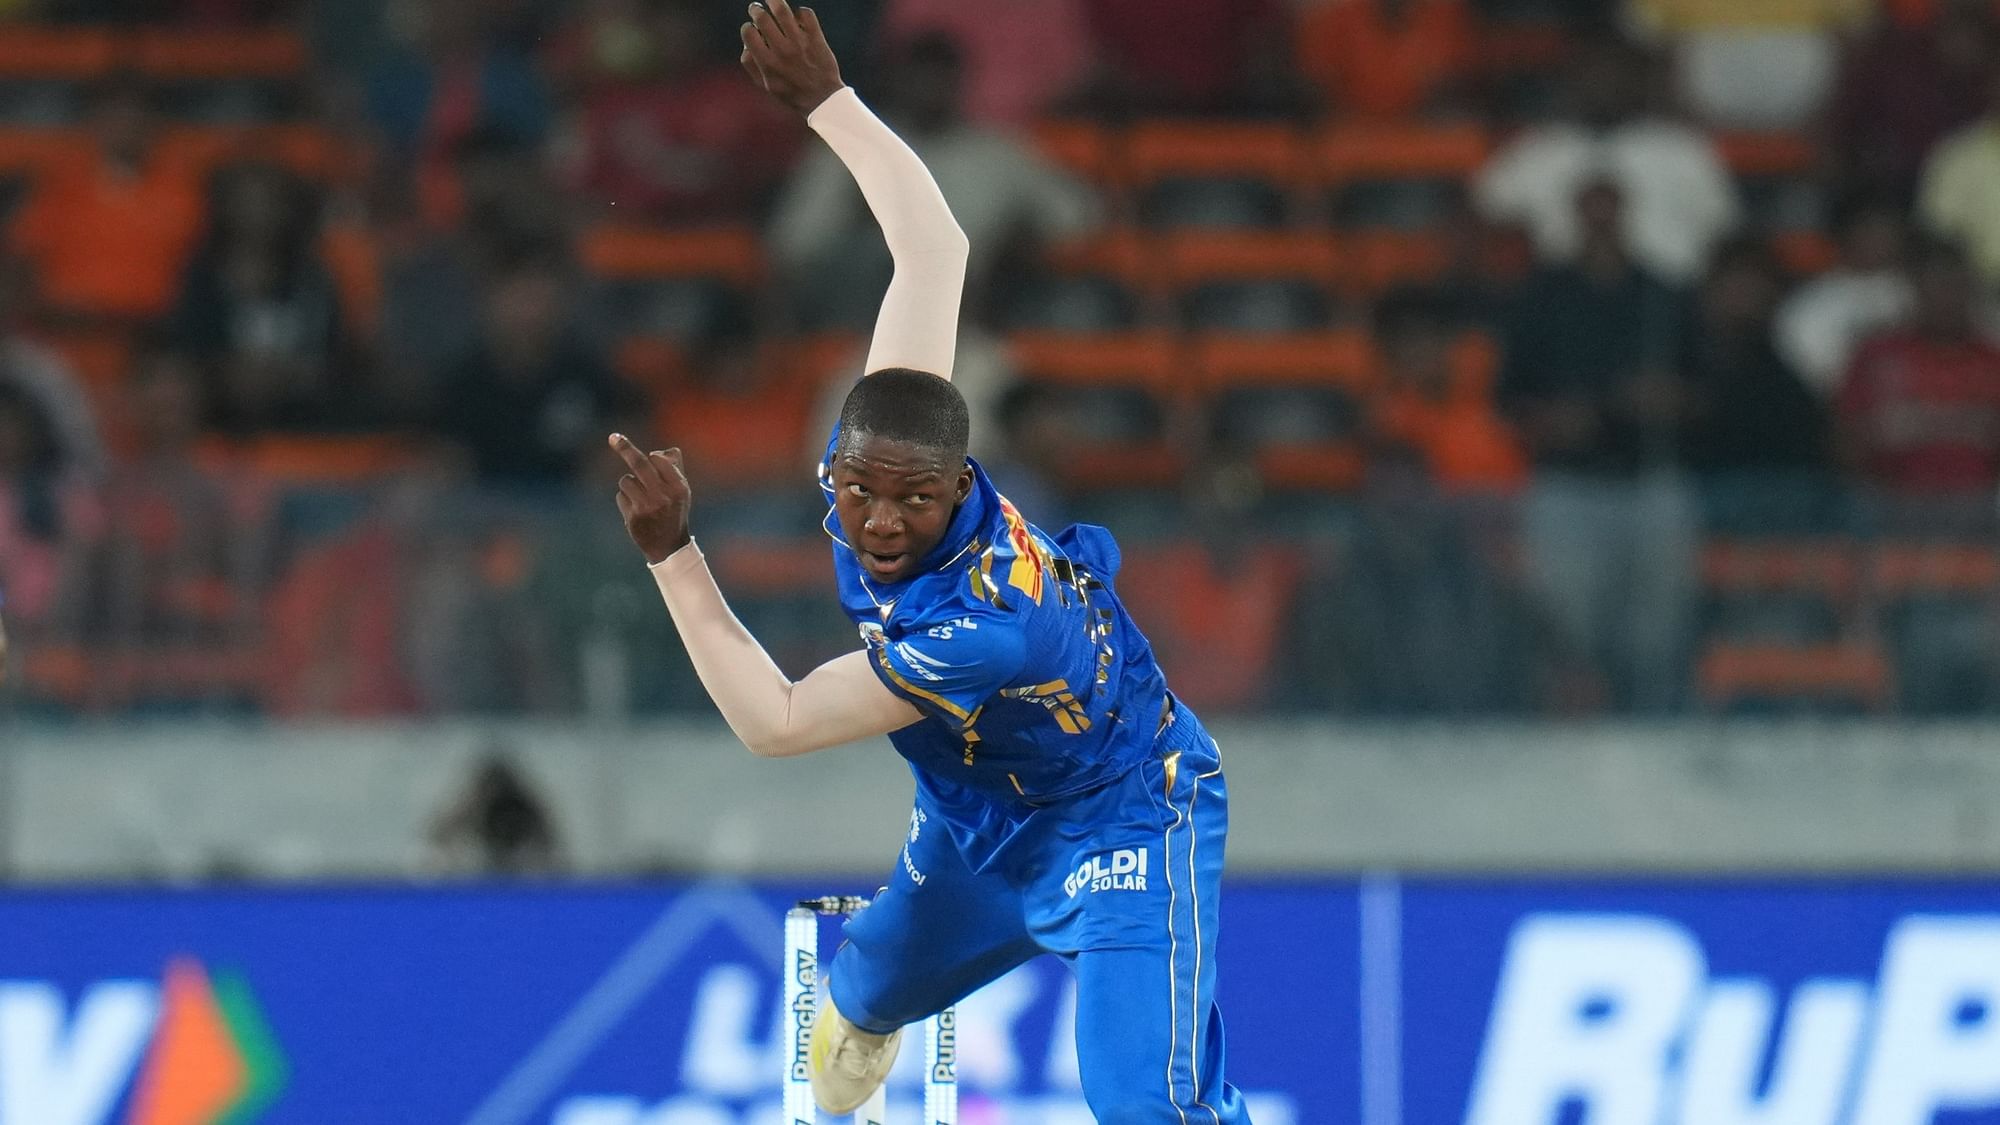 <div class="paragraphs"><p>Kwena Maphaka conceded 66 runs at an economy of 16.50 against Sunrisers Hyderabad</p></div>